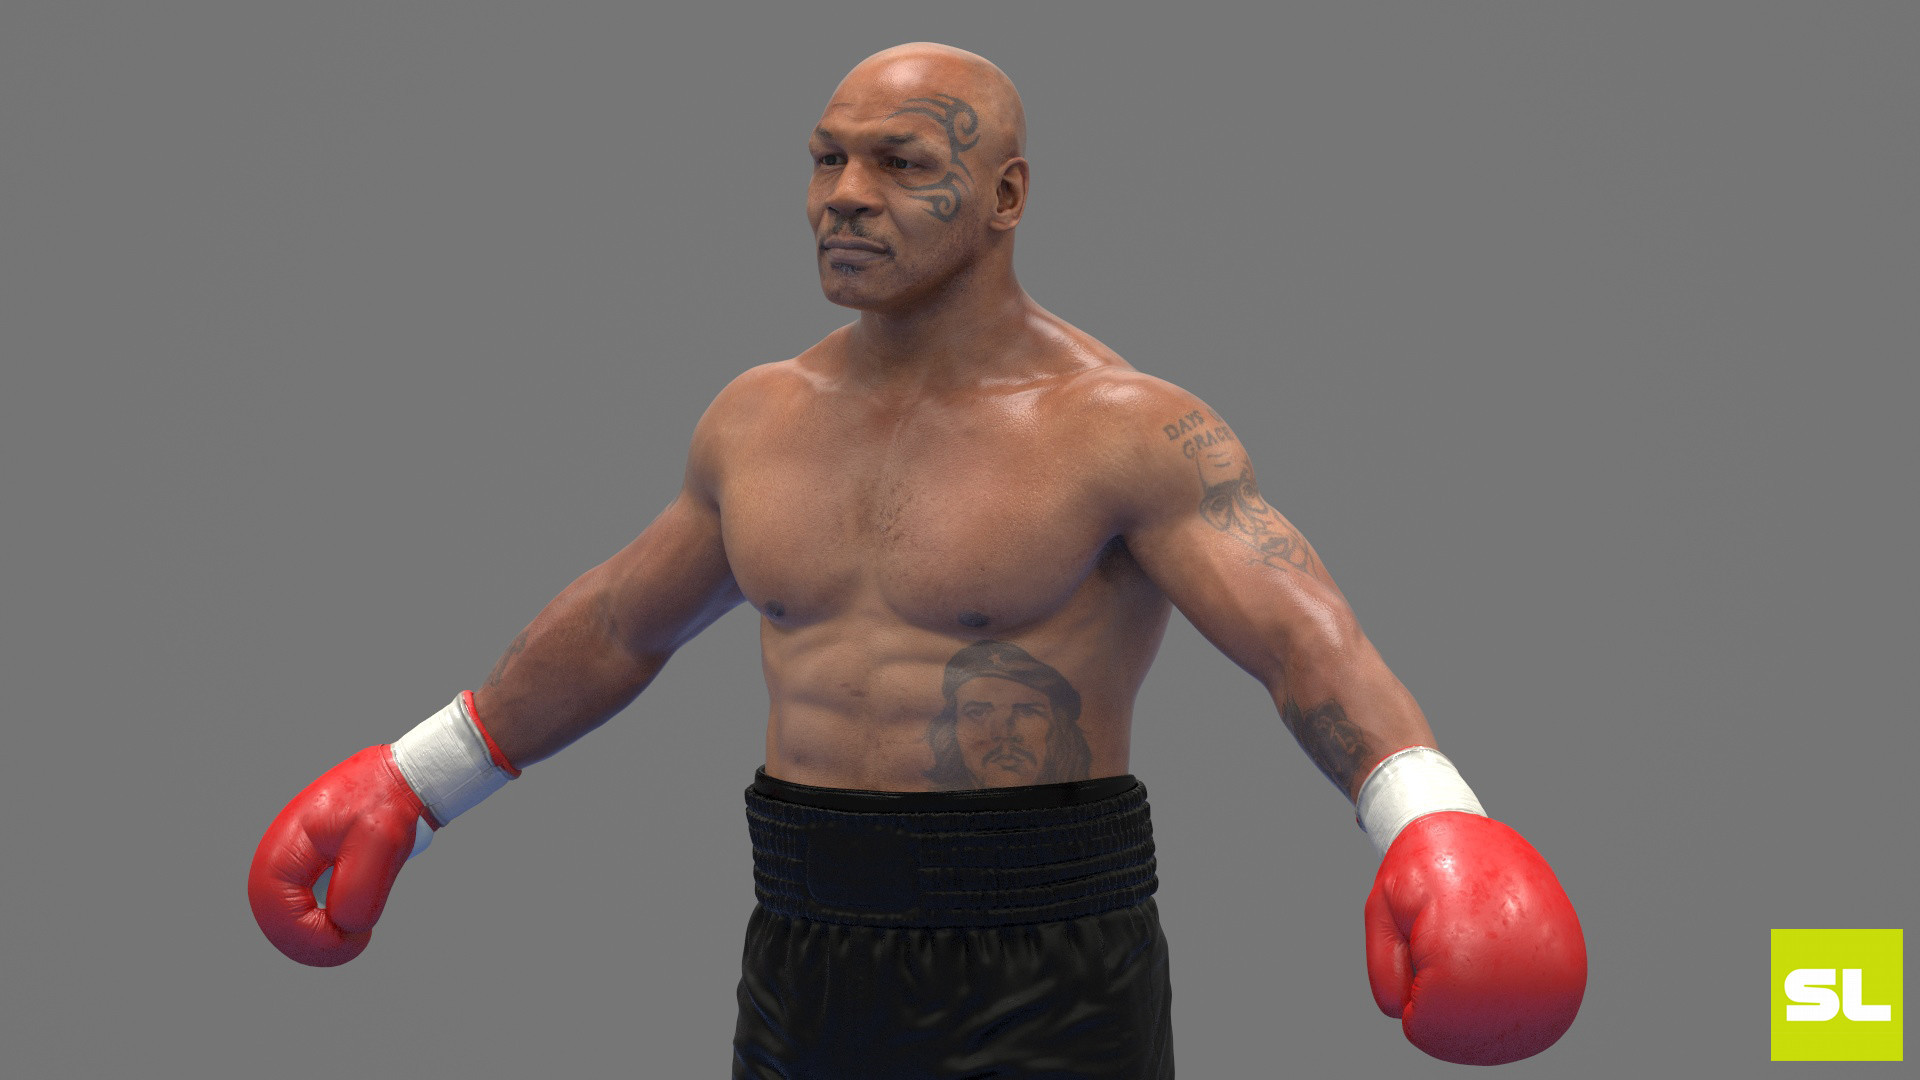 mike tyson wallpaper,professional boxer,boxing glove,muscle,arm,professional boxing